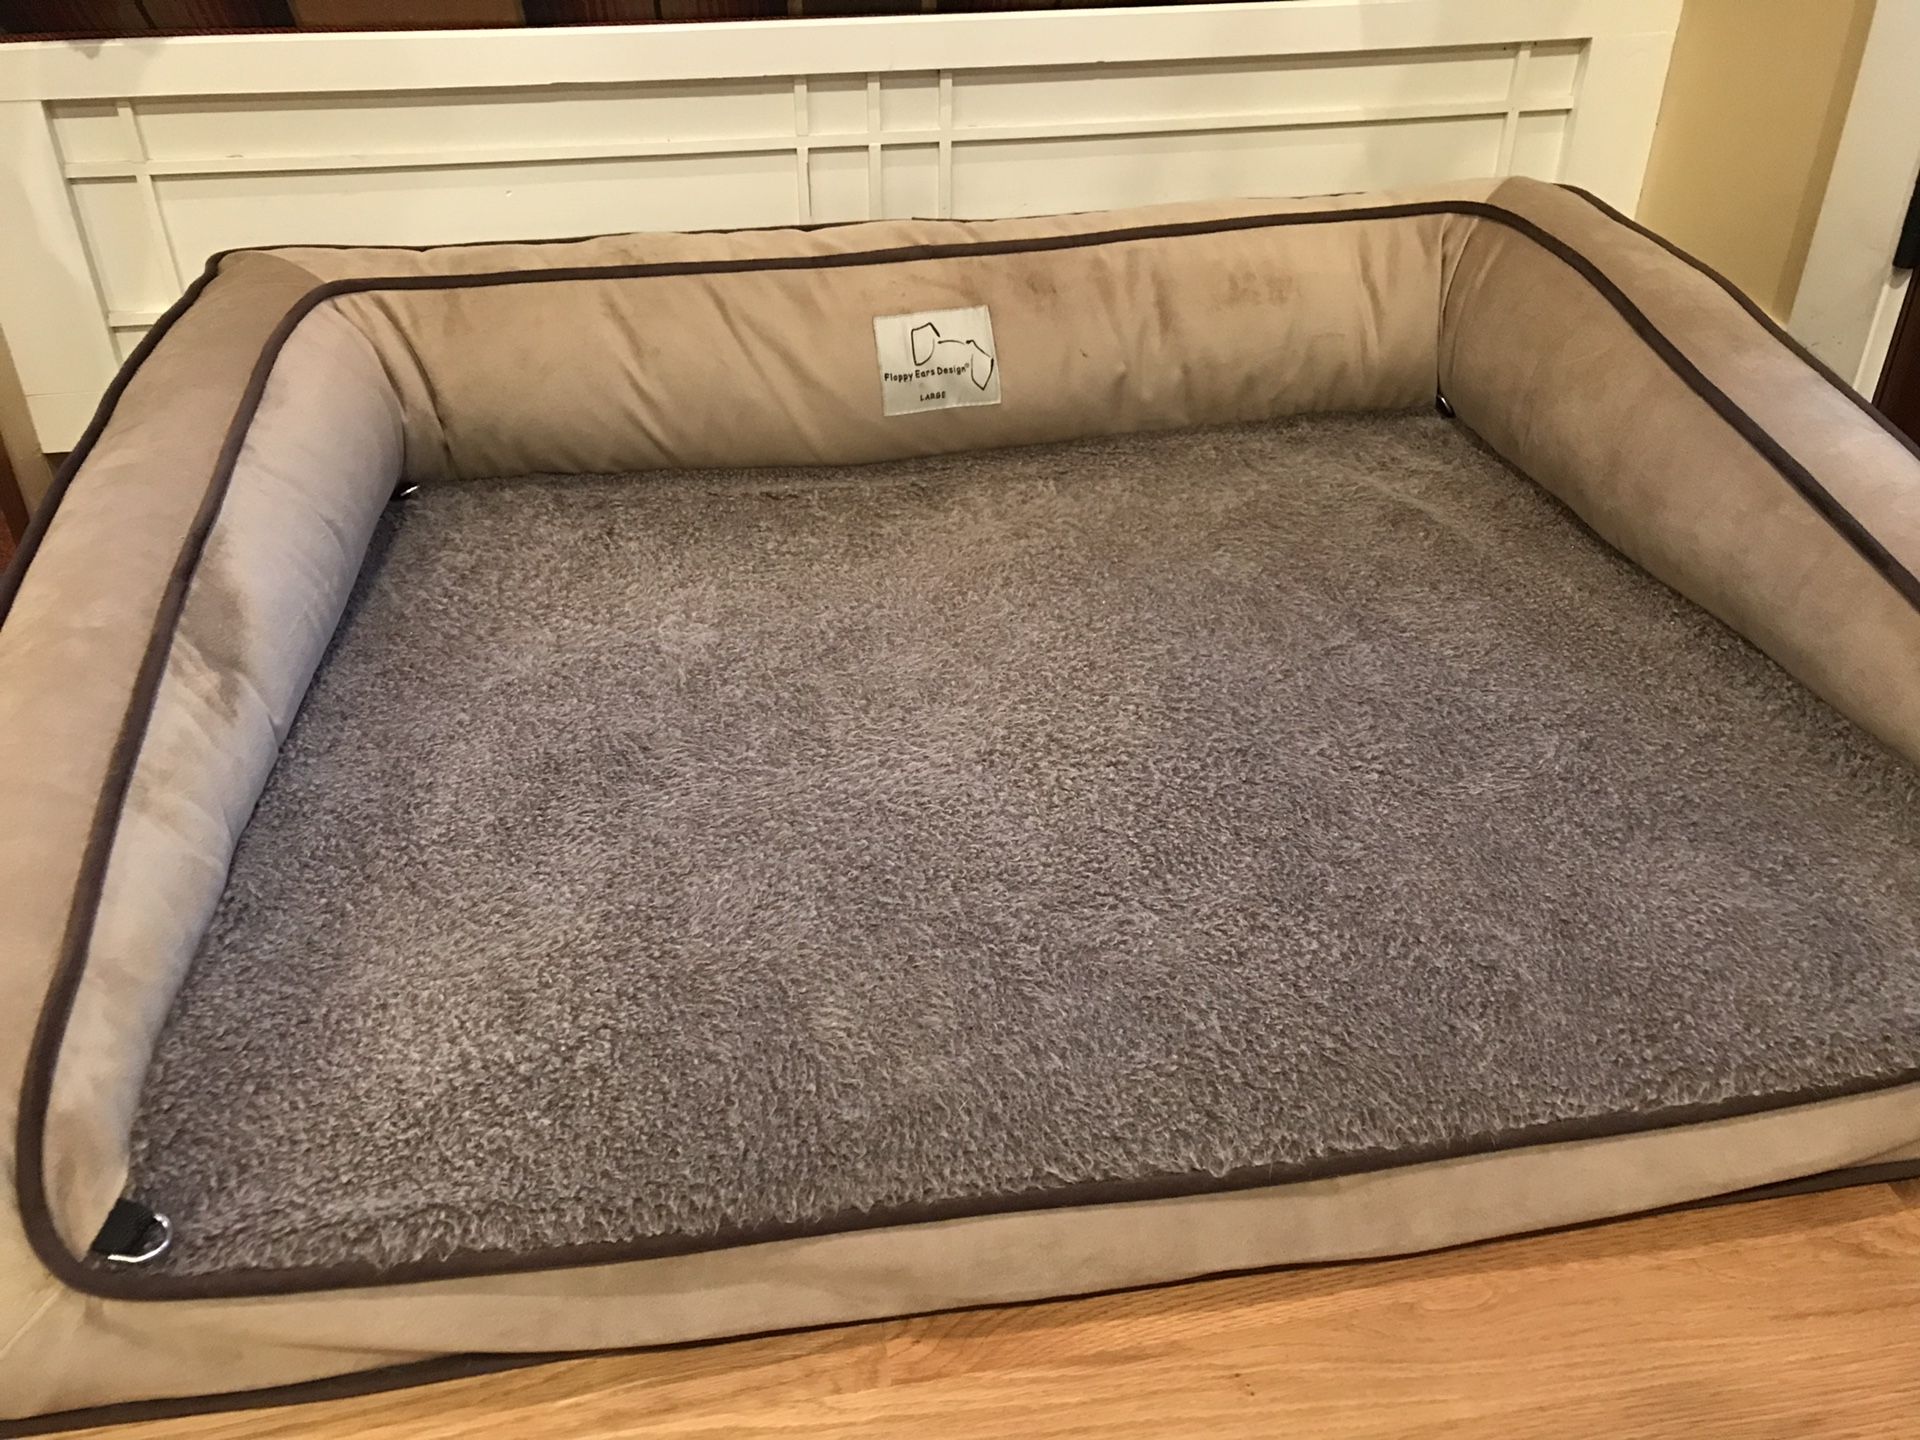 In the Company of Dogs large dog bed - originally $300